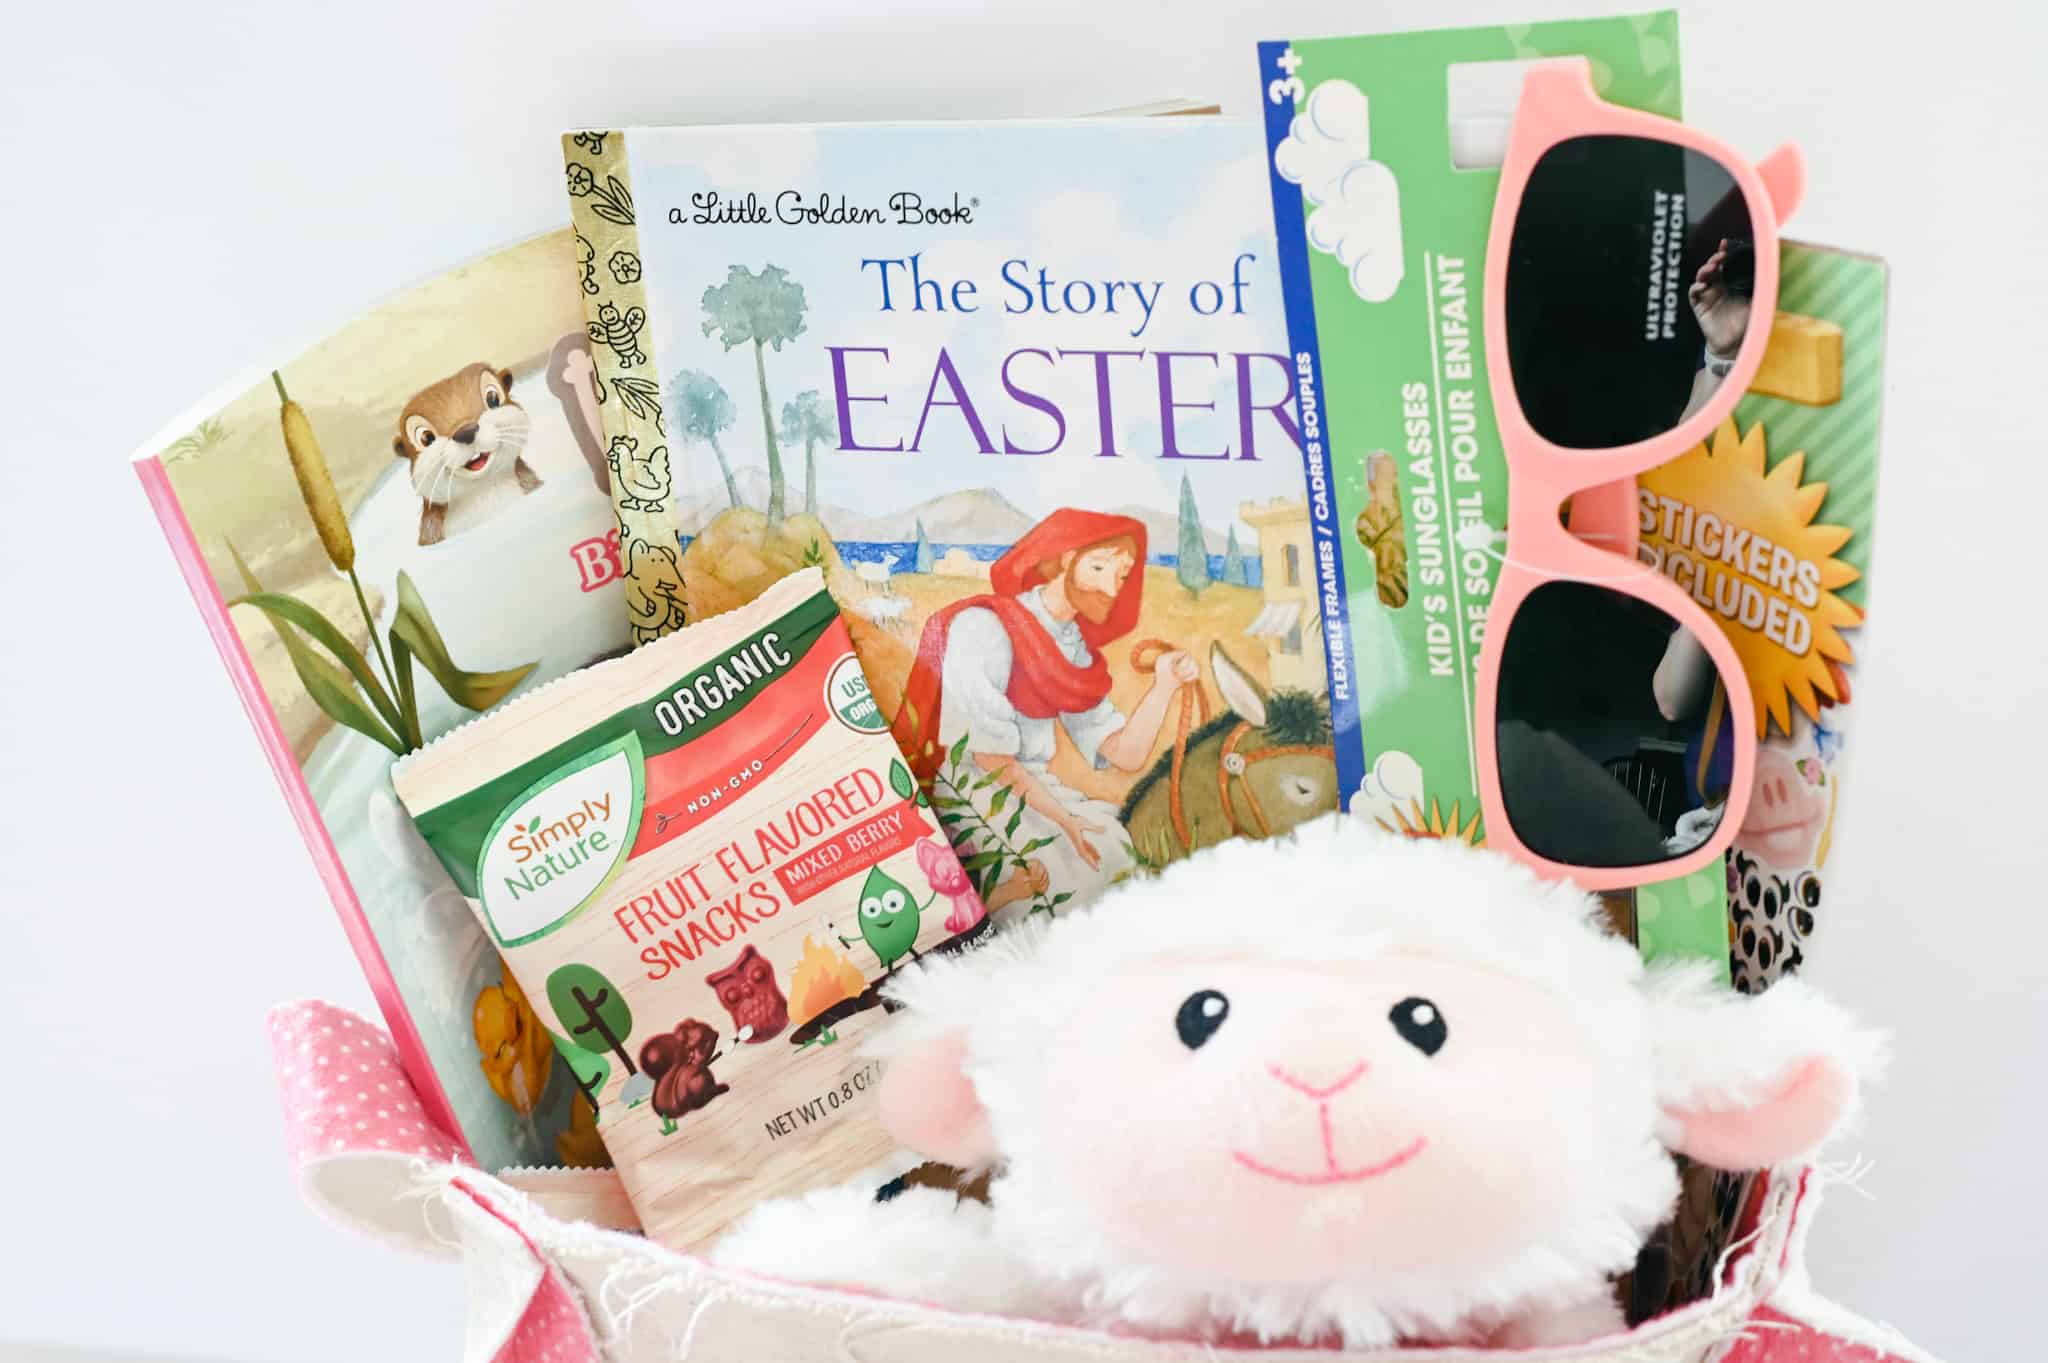 cloth easter basket with sunglasses, organic fruit snacks, easter books, color and activity books